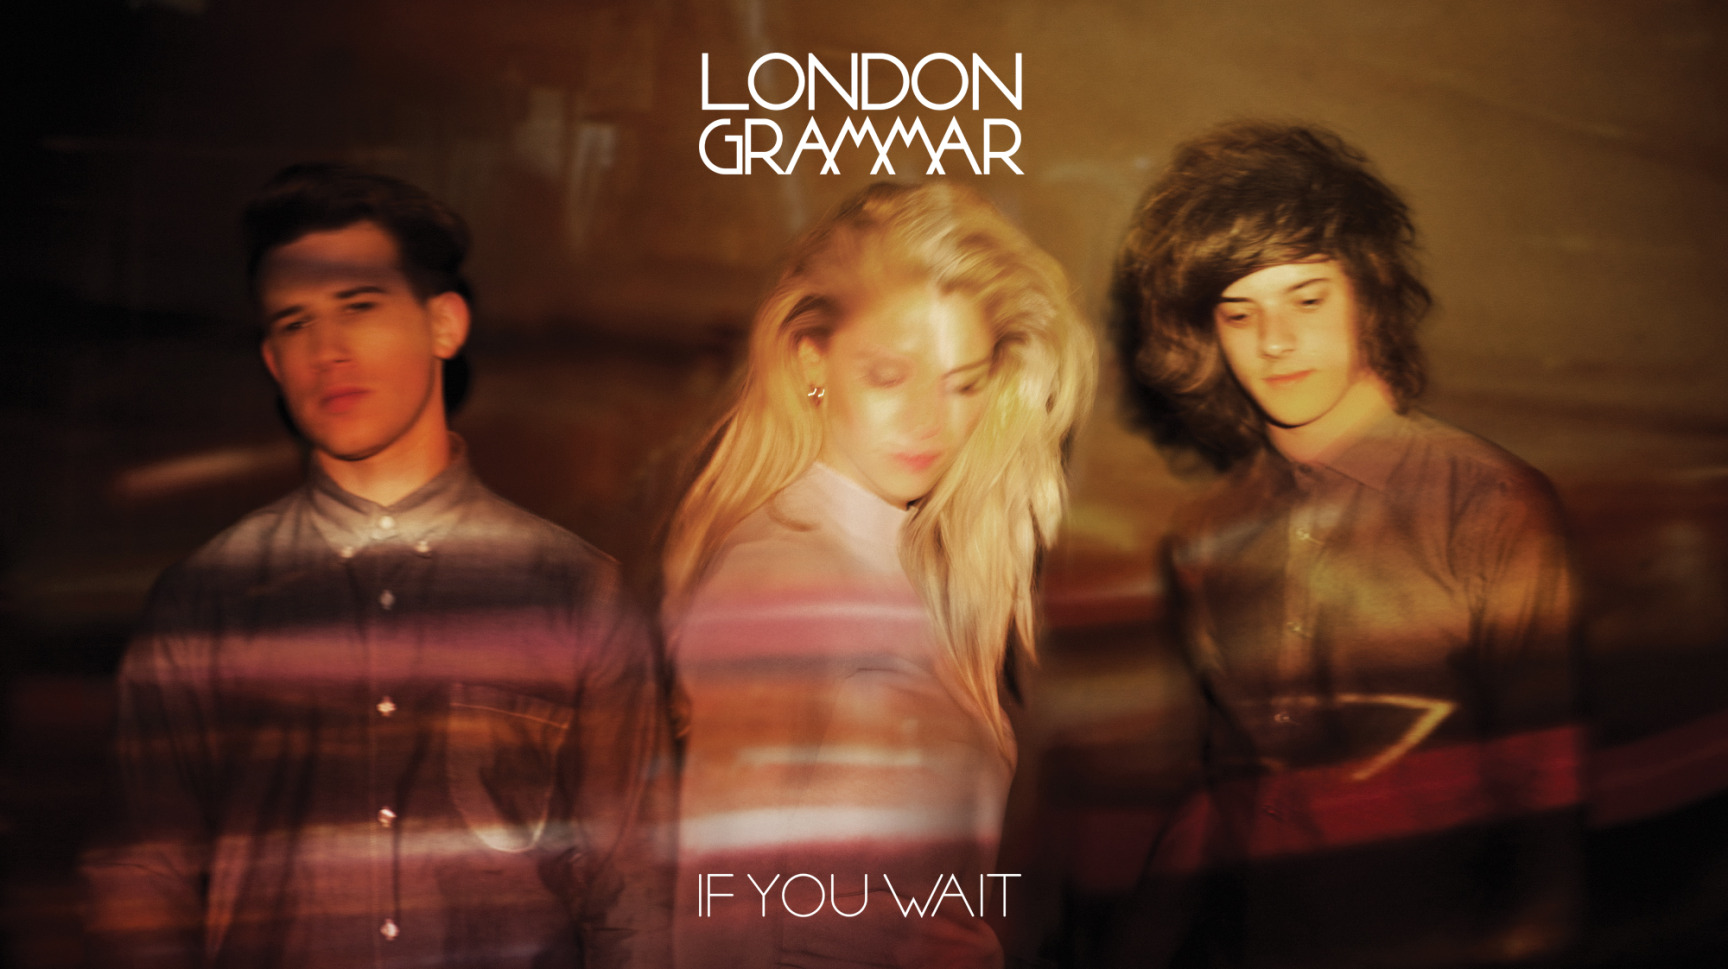 Music<br /><strong>London Grammar - If You Wait</strong>